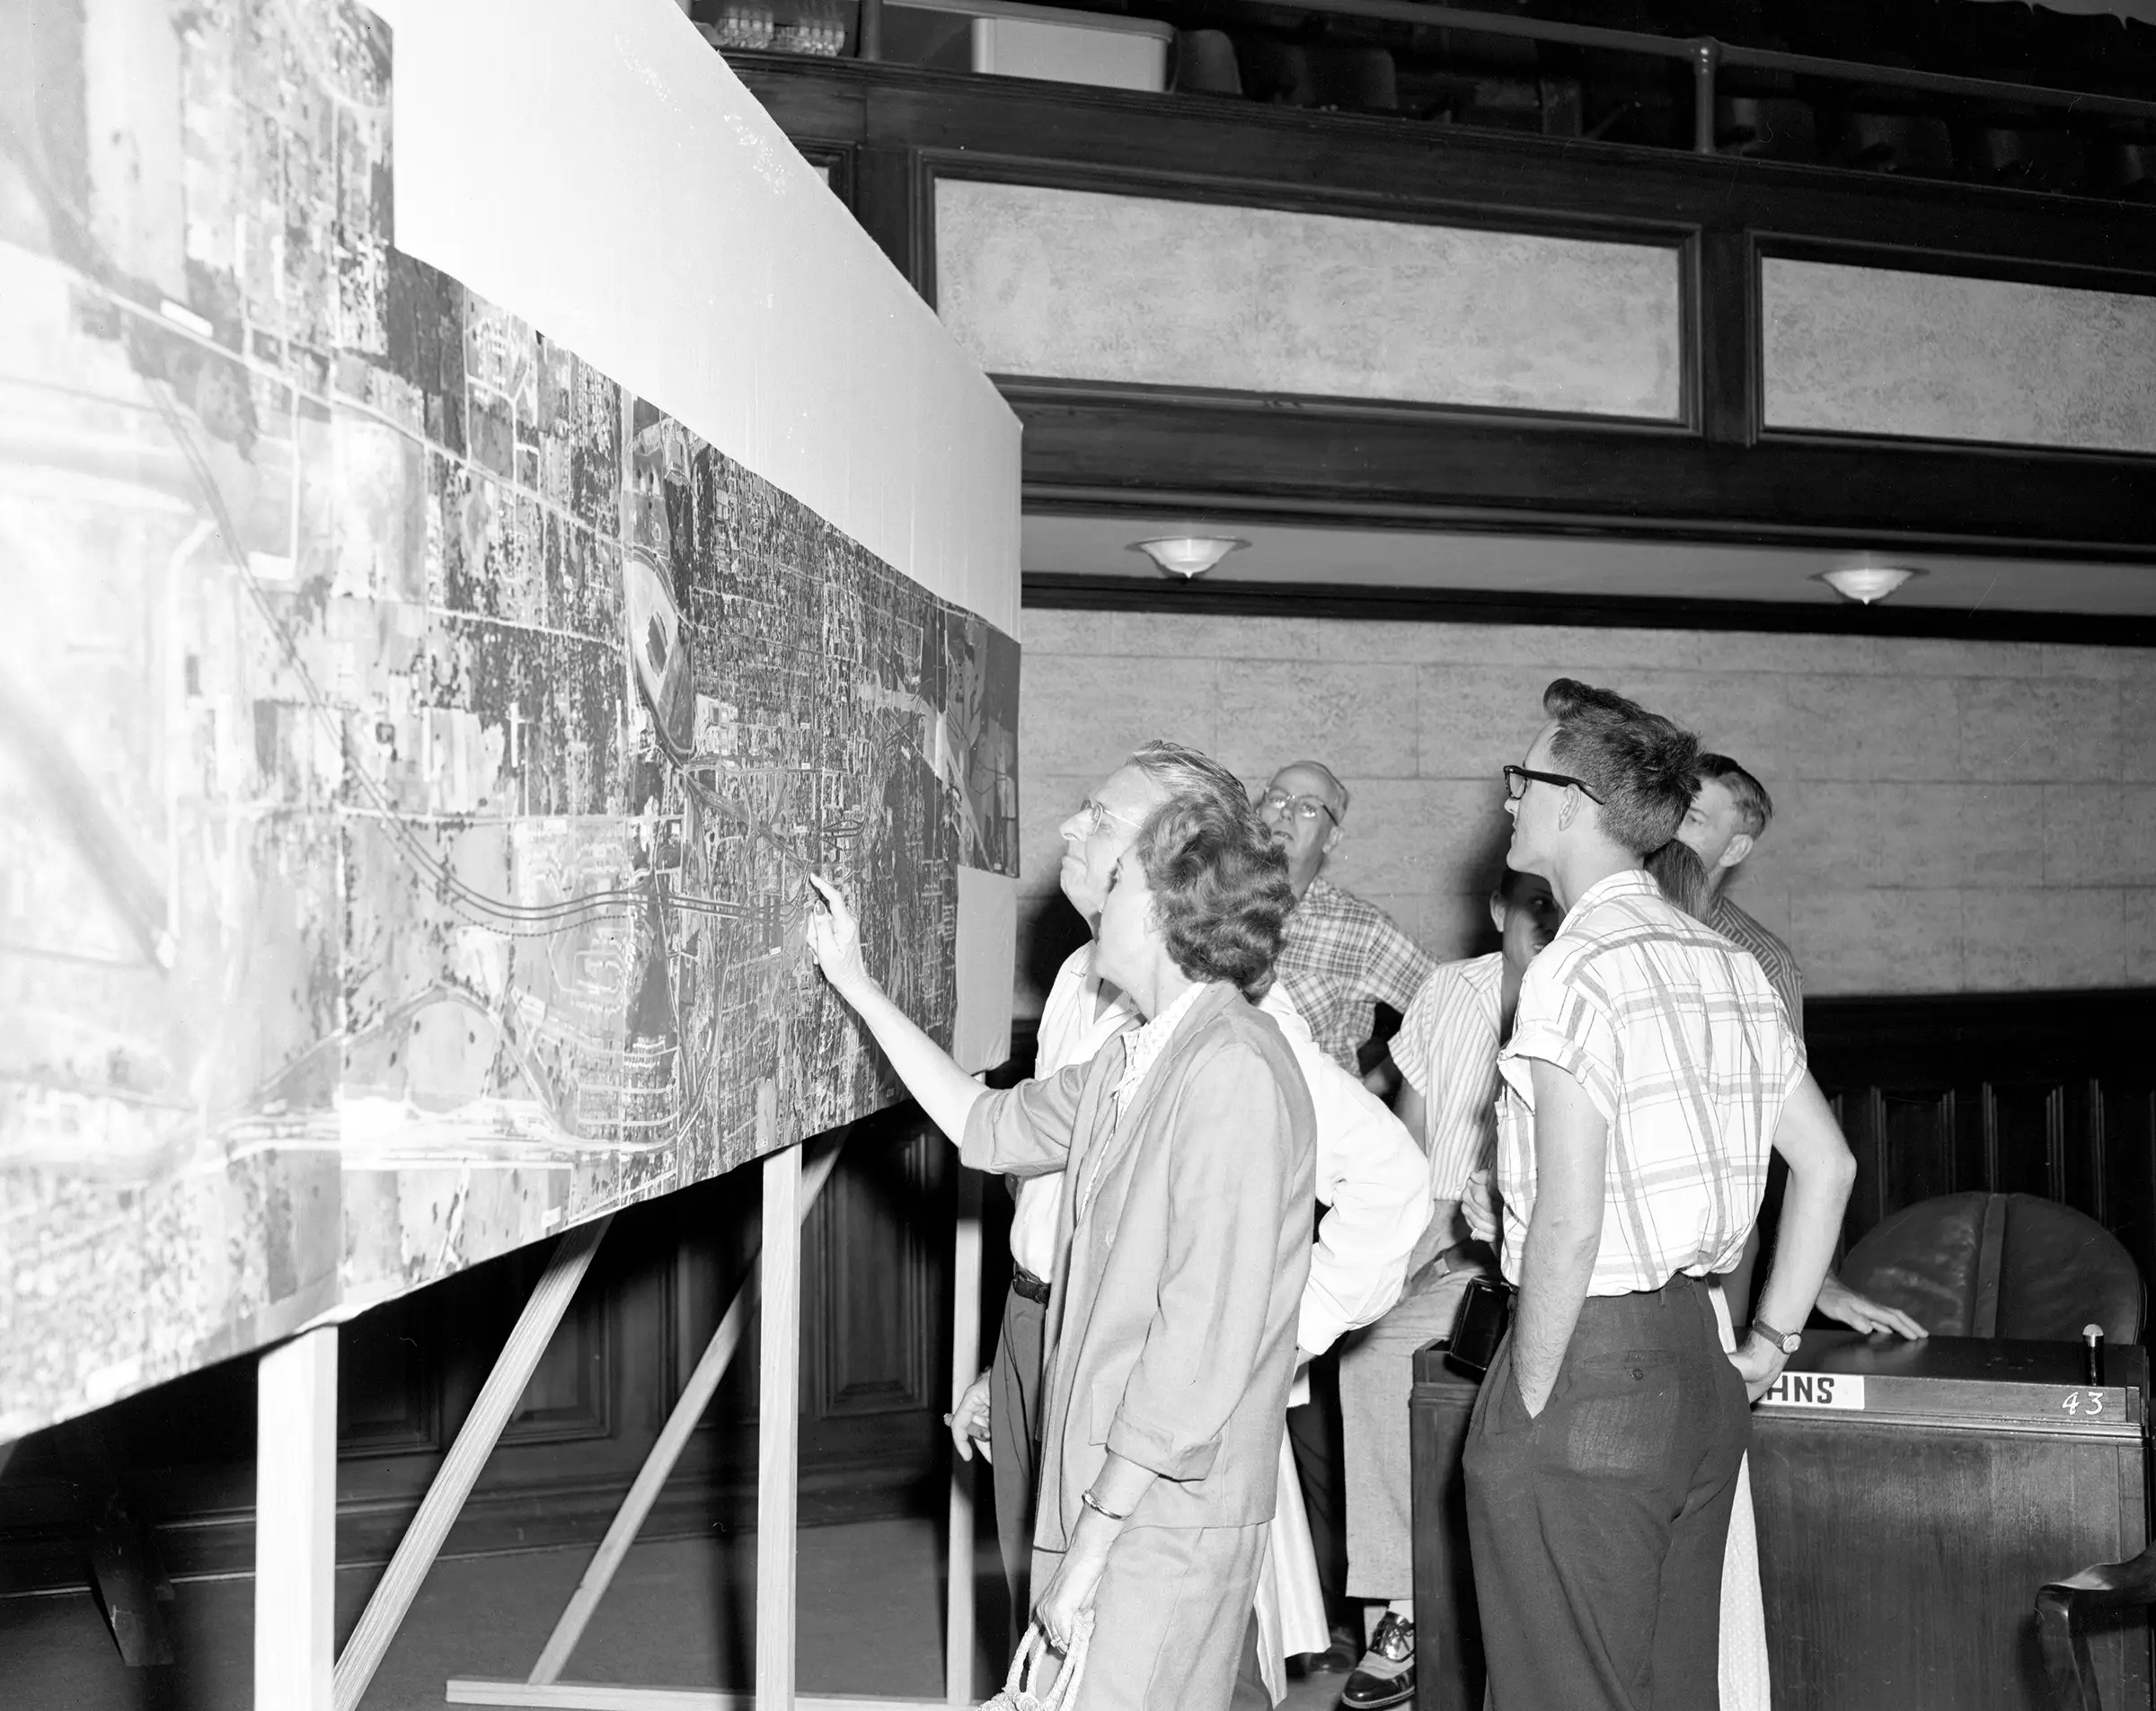 Archival Photo of Citizens Reviewing a Planning Map